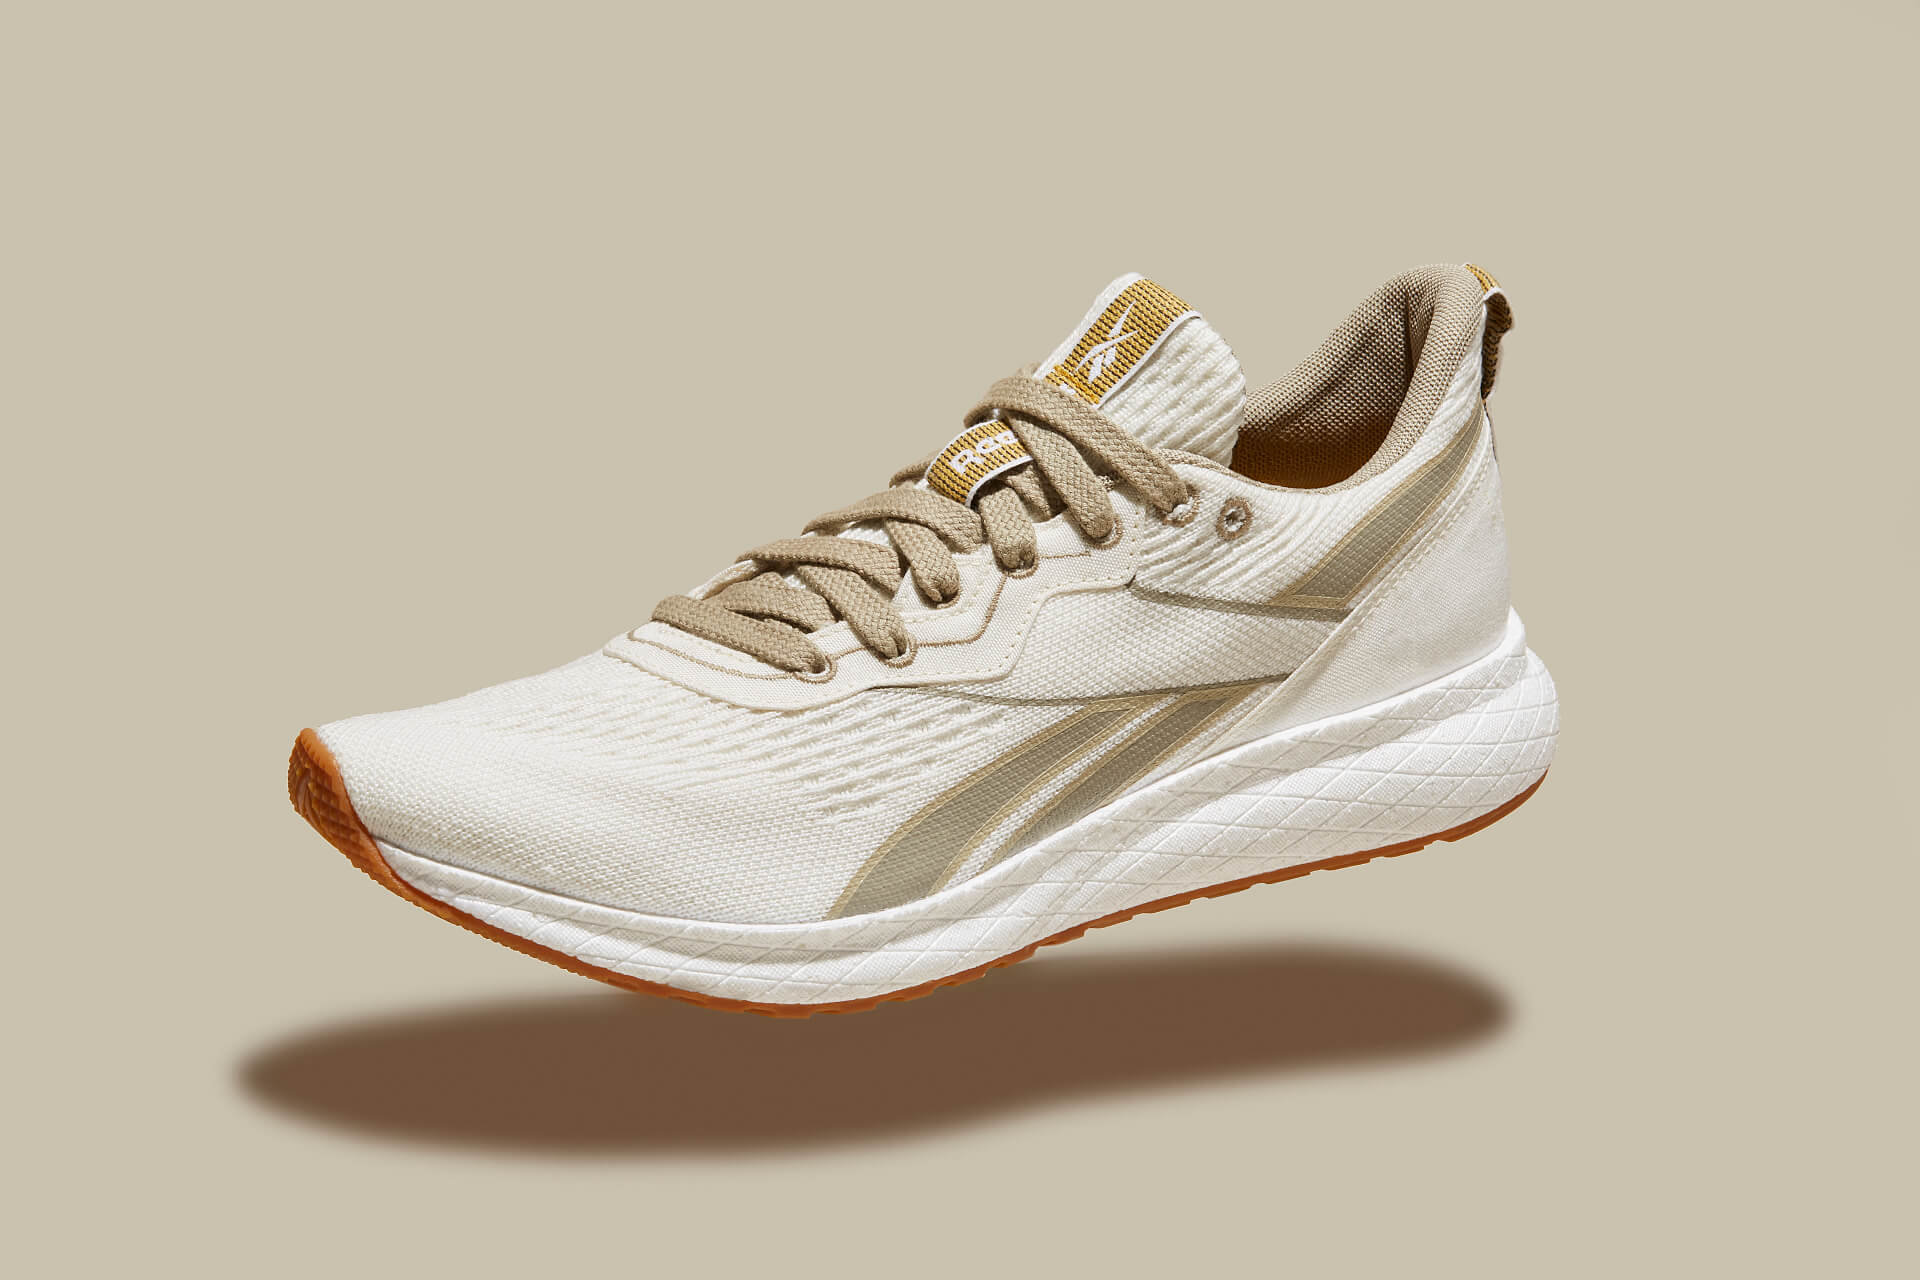 Louis Vuitton Launches Luxury, Sustainable, Corn-Based Sneakers